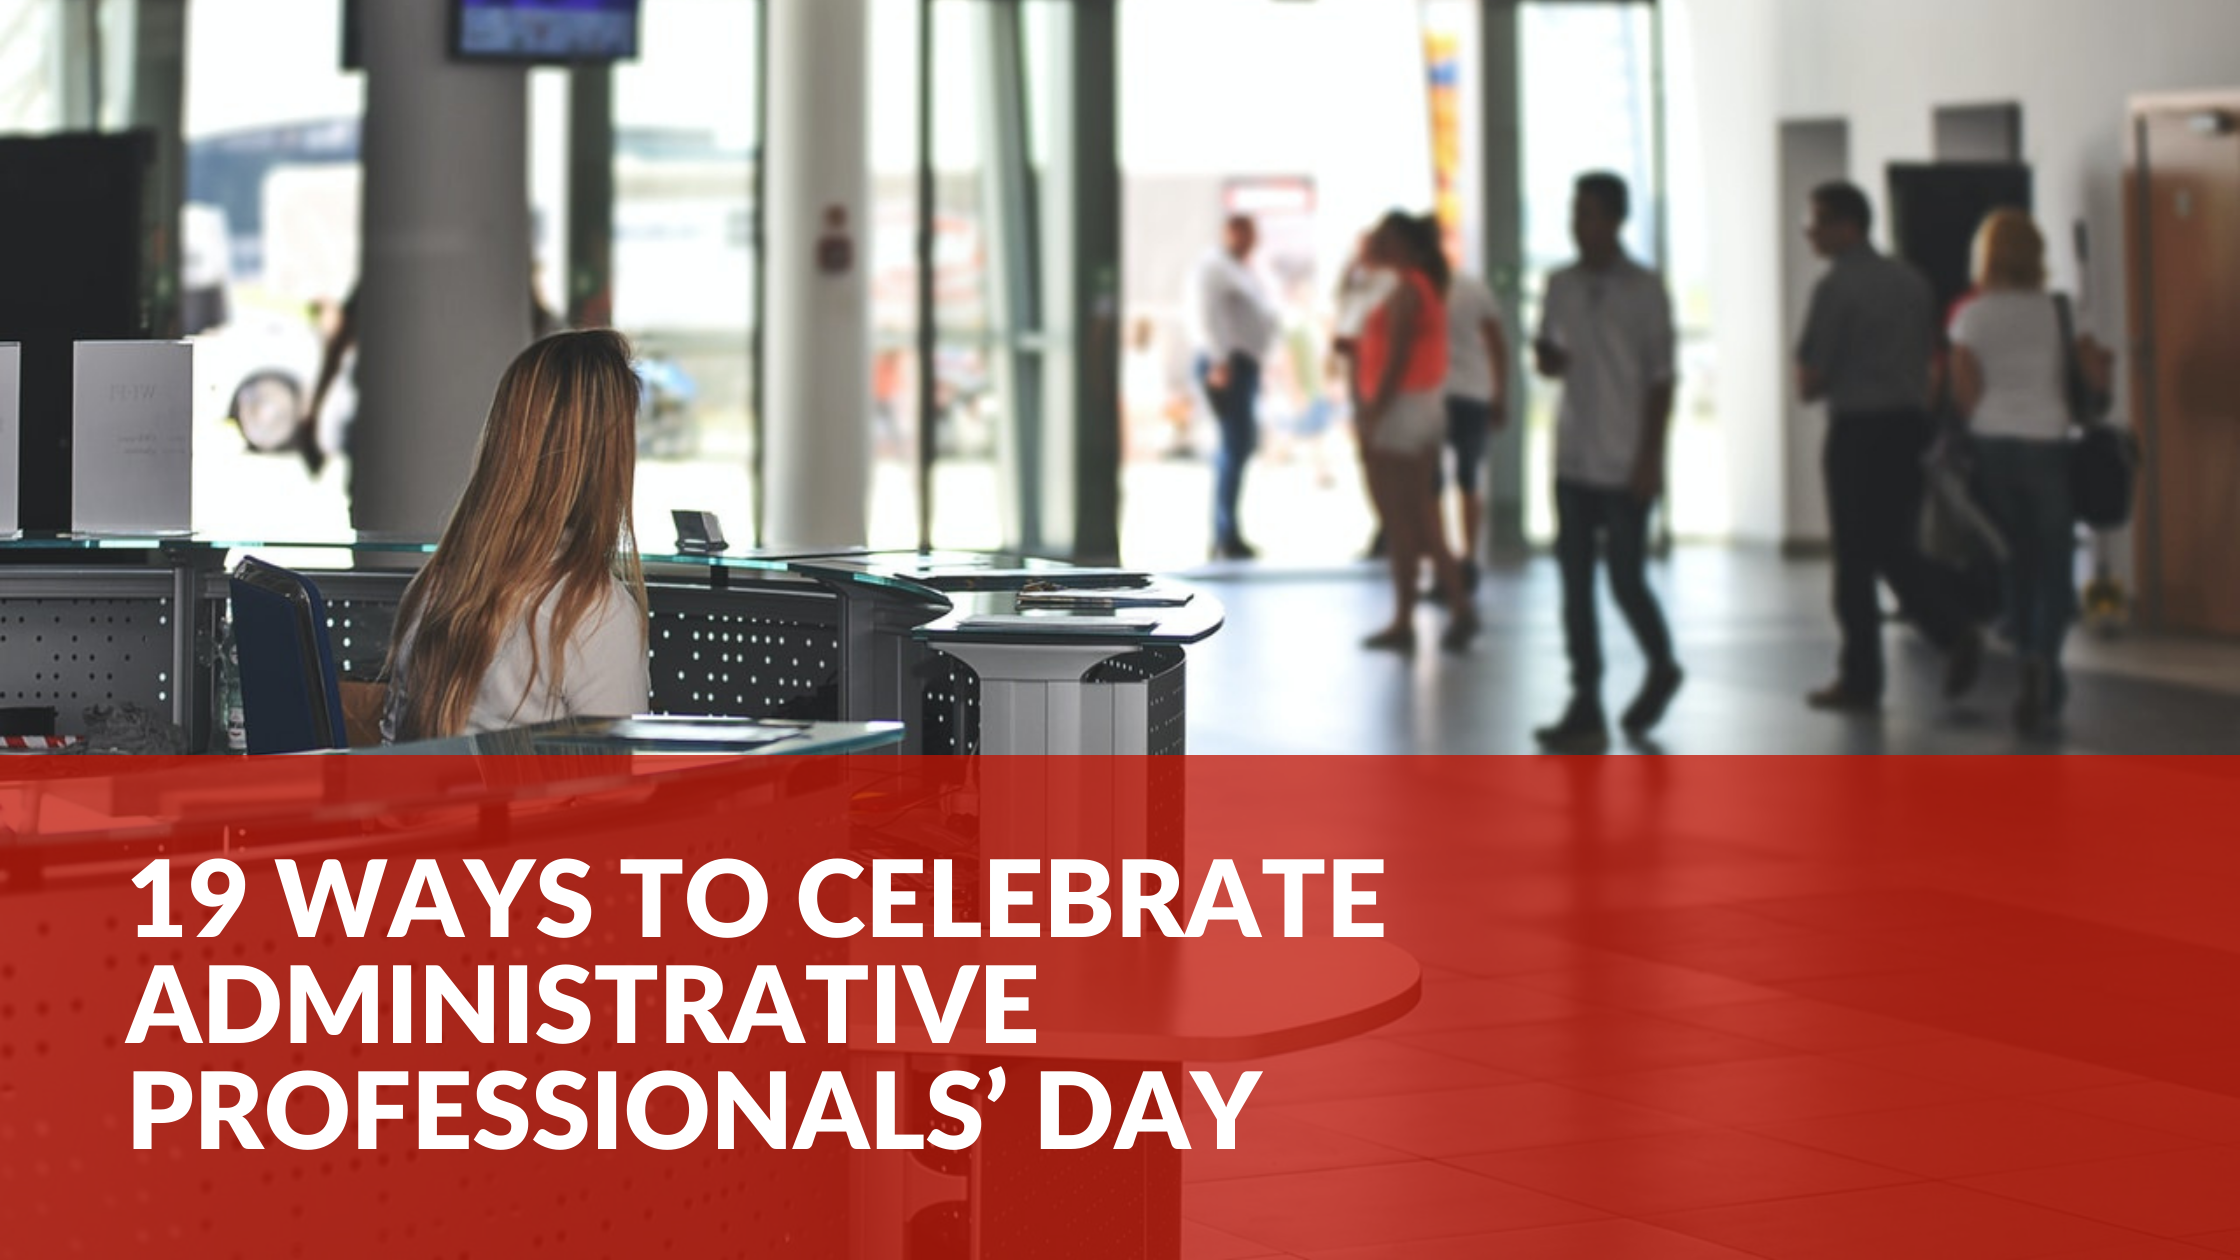 20 Ways to Celebrate Administrative Professionals’ Day